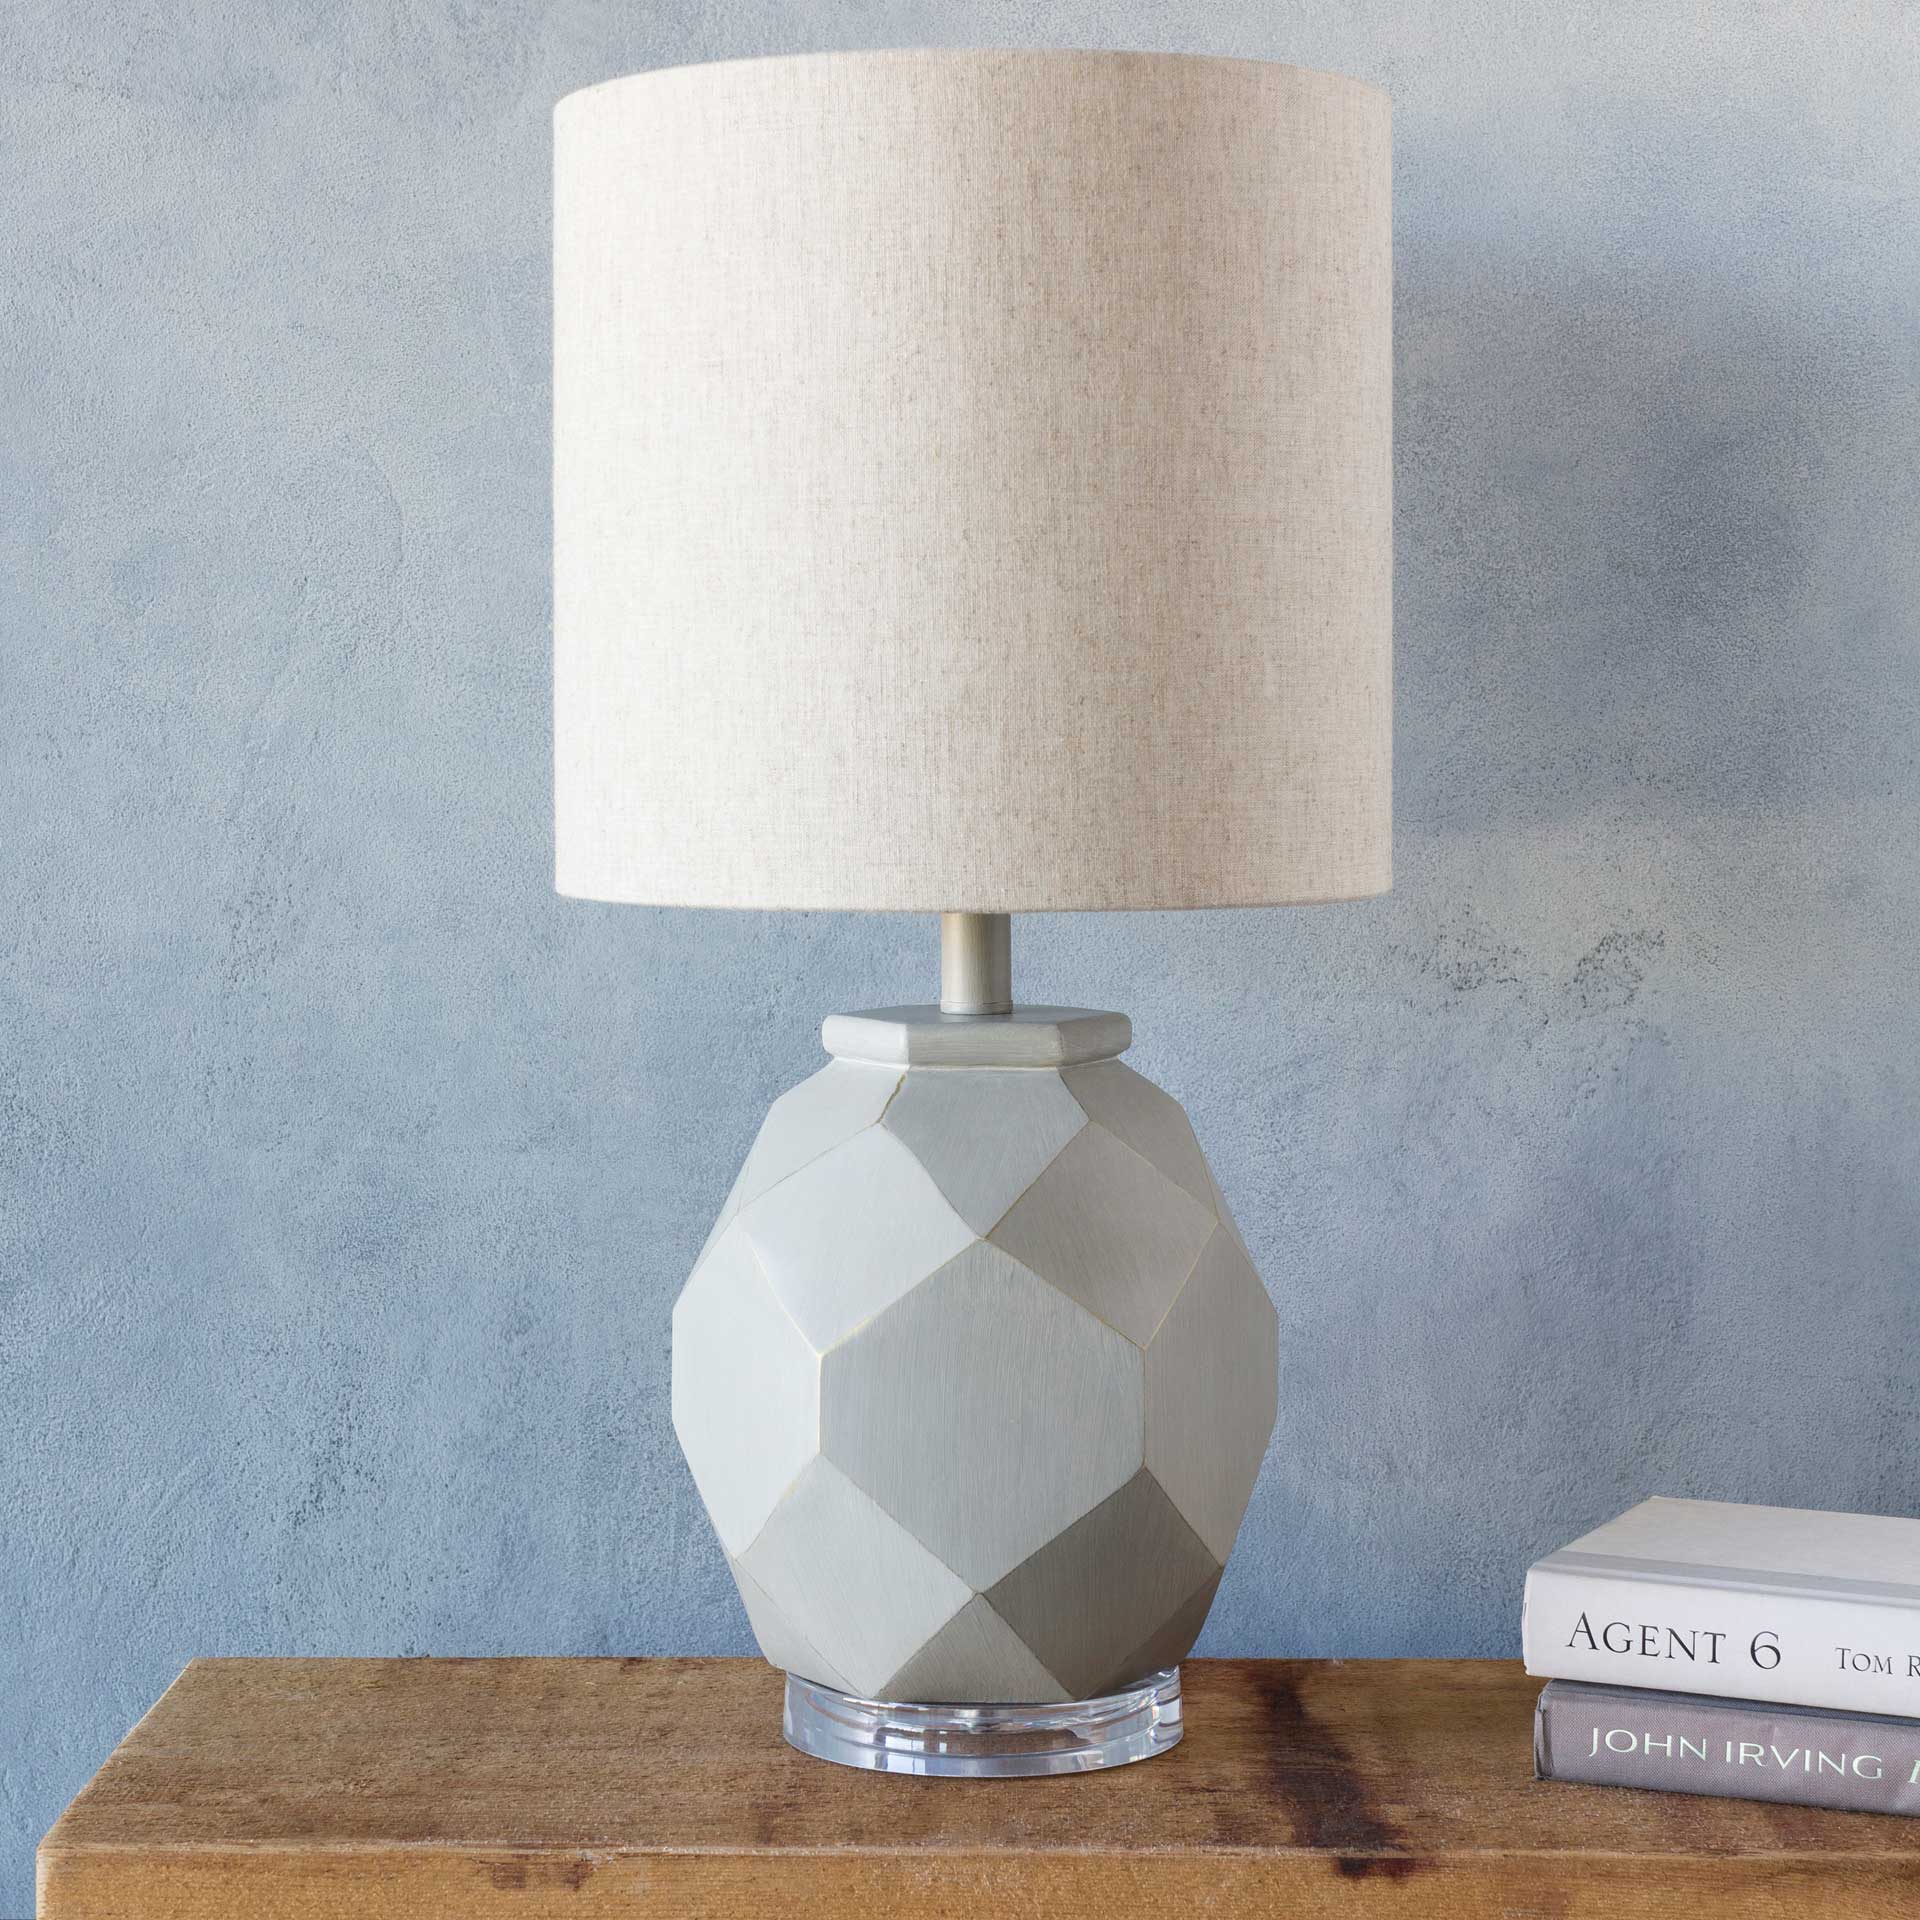 Ainsley Table Lamp Beige/Ivory/Light Gray